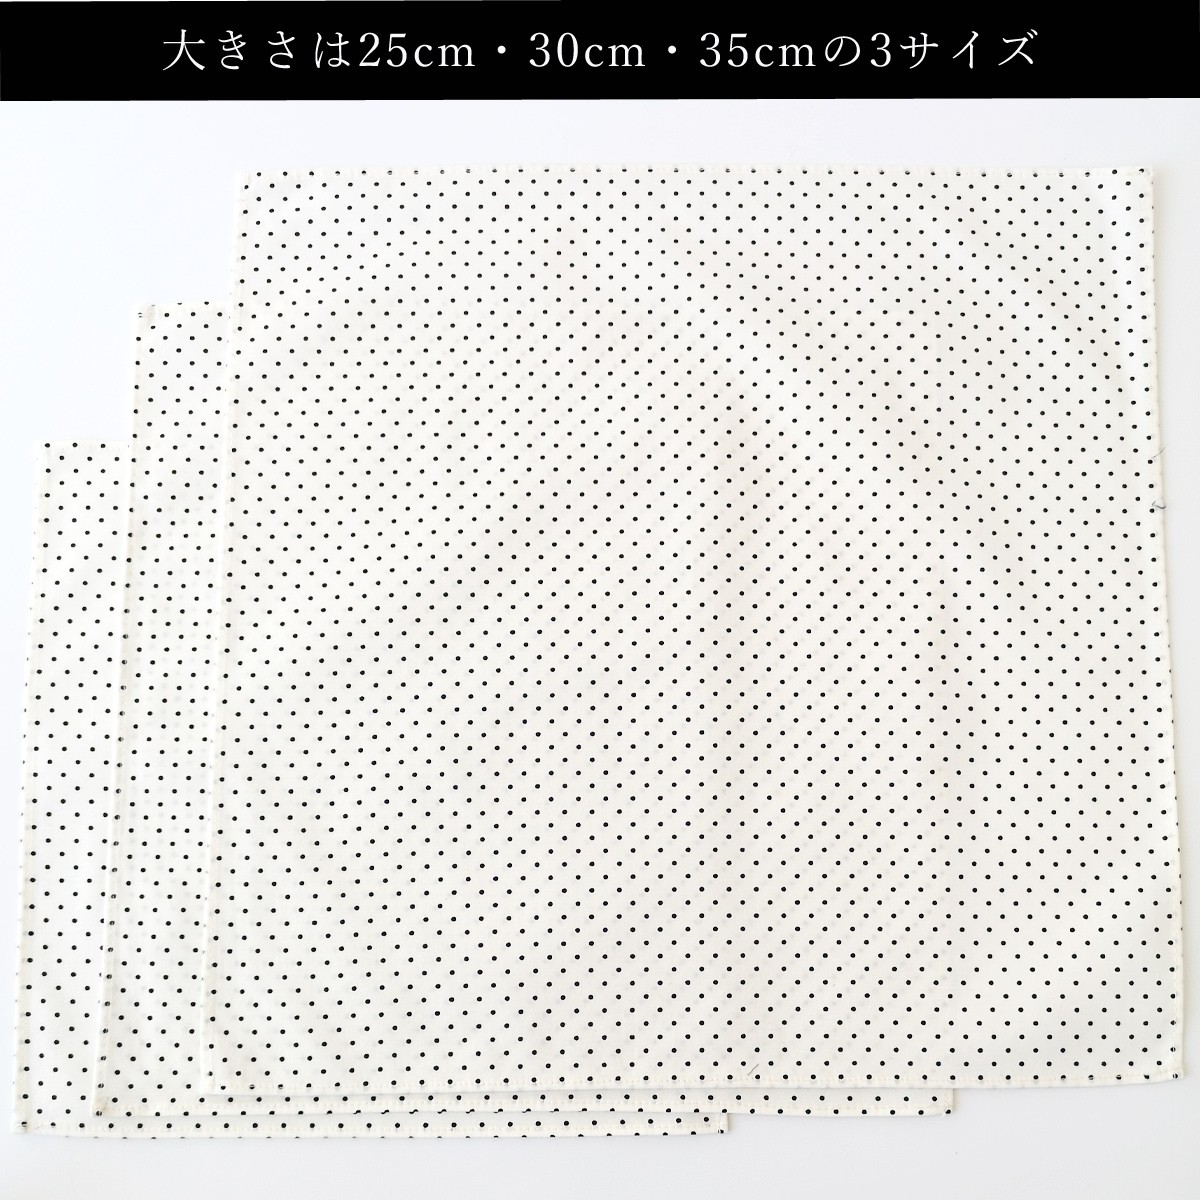  pocket square chief made in Japan men's cotton 100% dot large size large white navy Brown business wedding cosplay Halloween coming-of-age ceremony mail service free shipping 